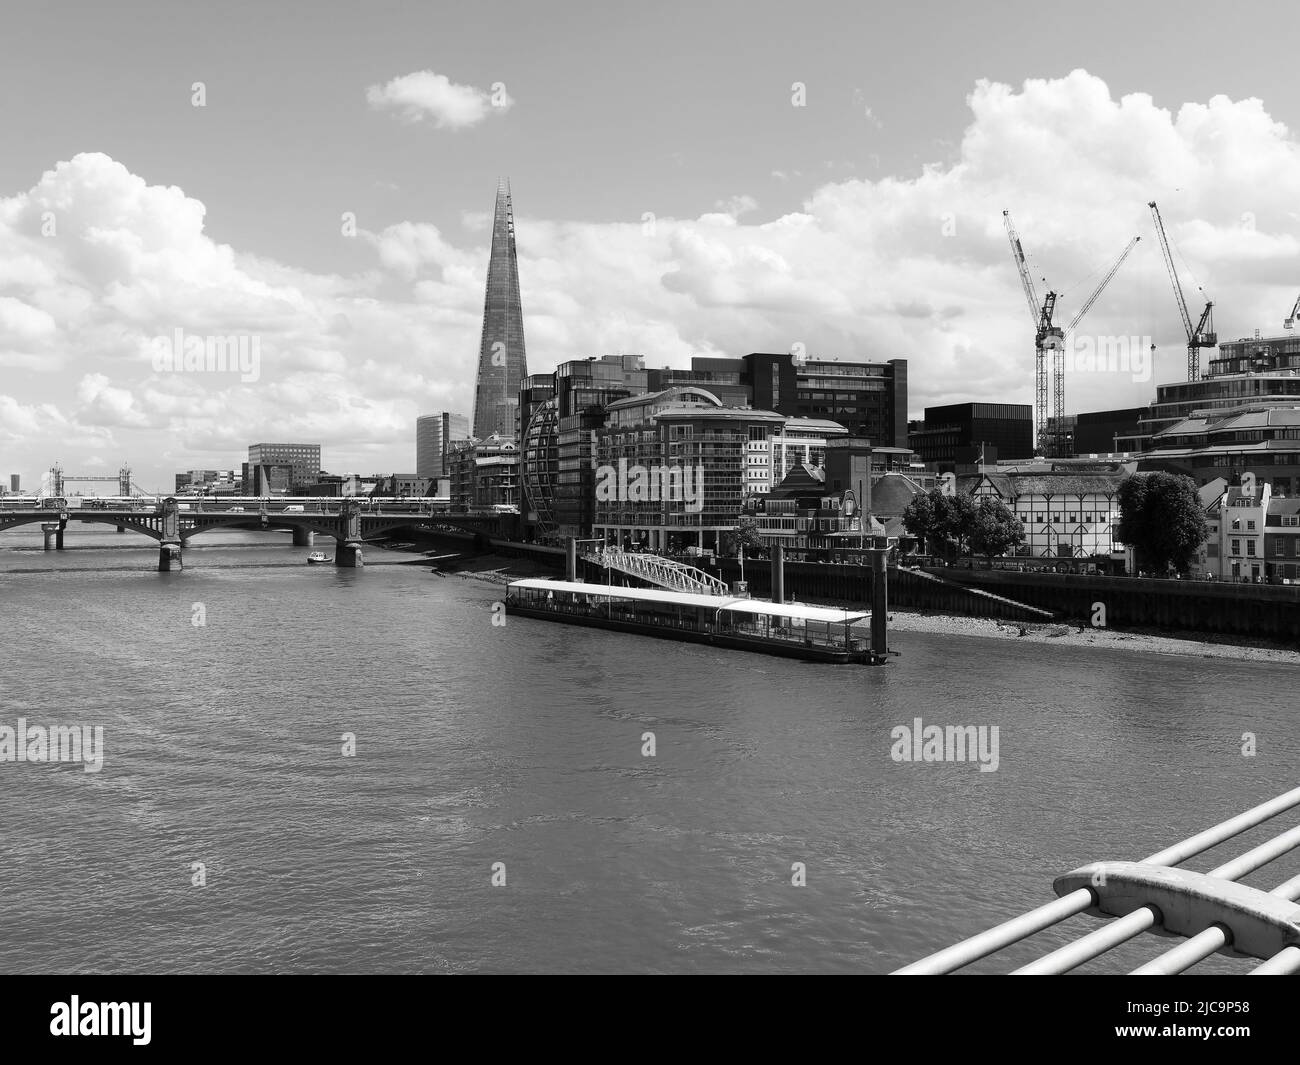 London, Greater London, England, June 08 2022: Monochrome. View towards Southwark including Shakespears Globe Theatre, The Shard skyscraper, with Towe Stock Photo